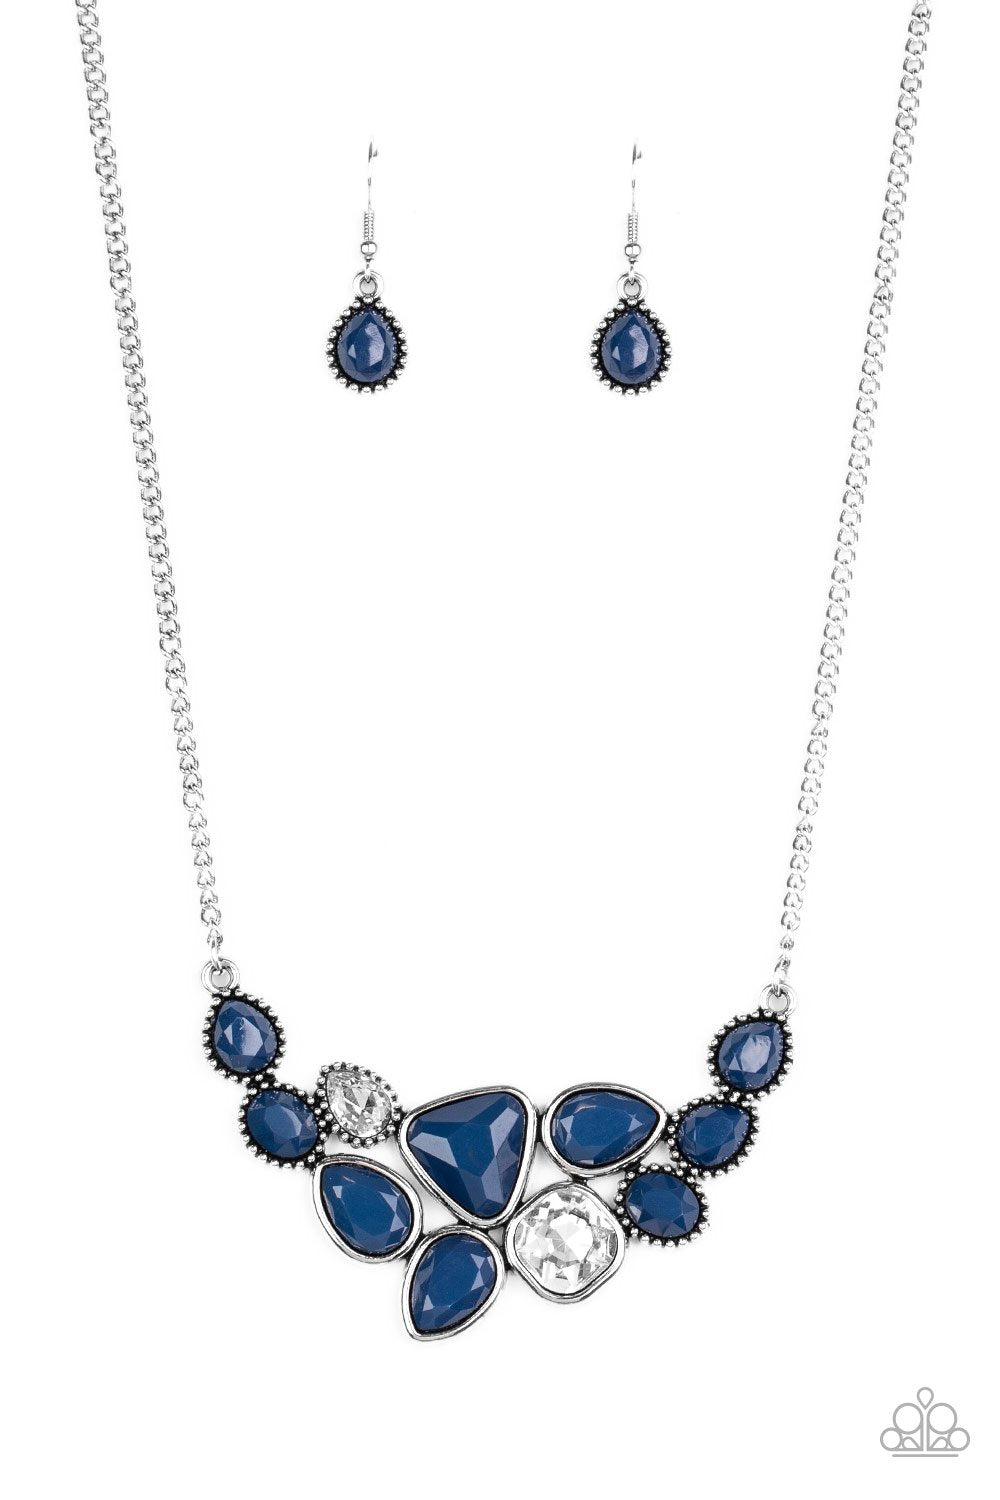 Breathtaking Brilliance Blue and White Necklace - Paparazzi Accessories-CarasShop.com - $5 Jewelry by Cara Jewels